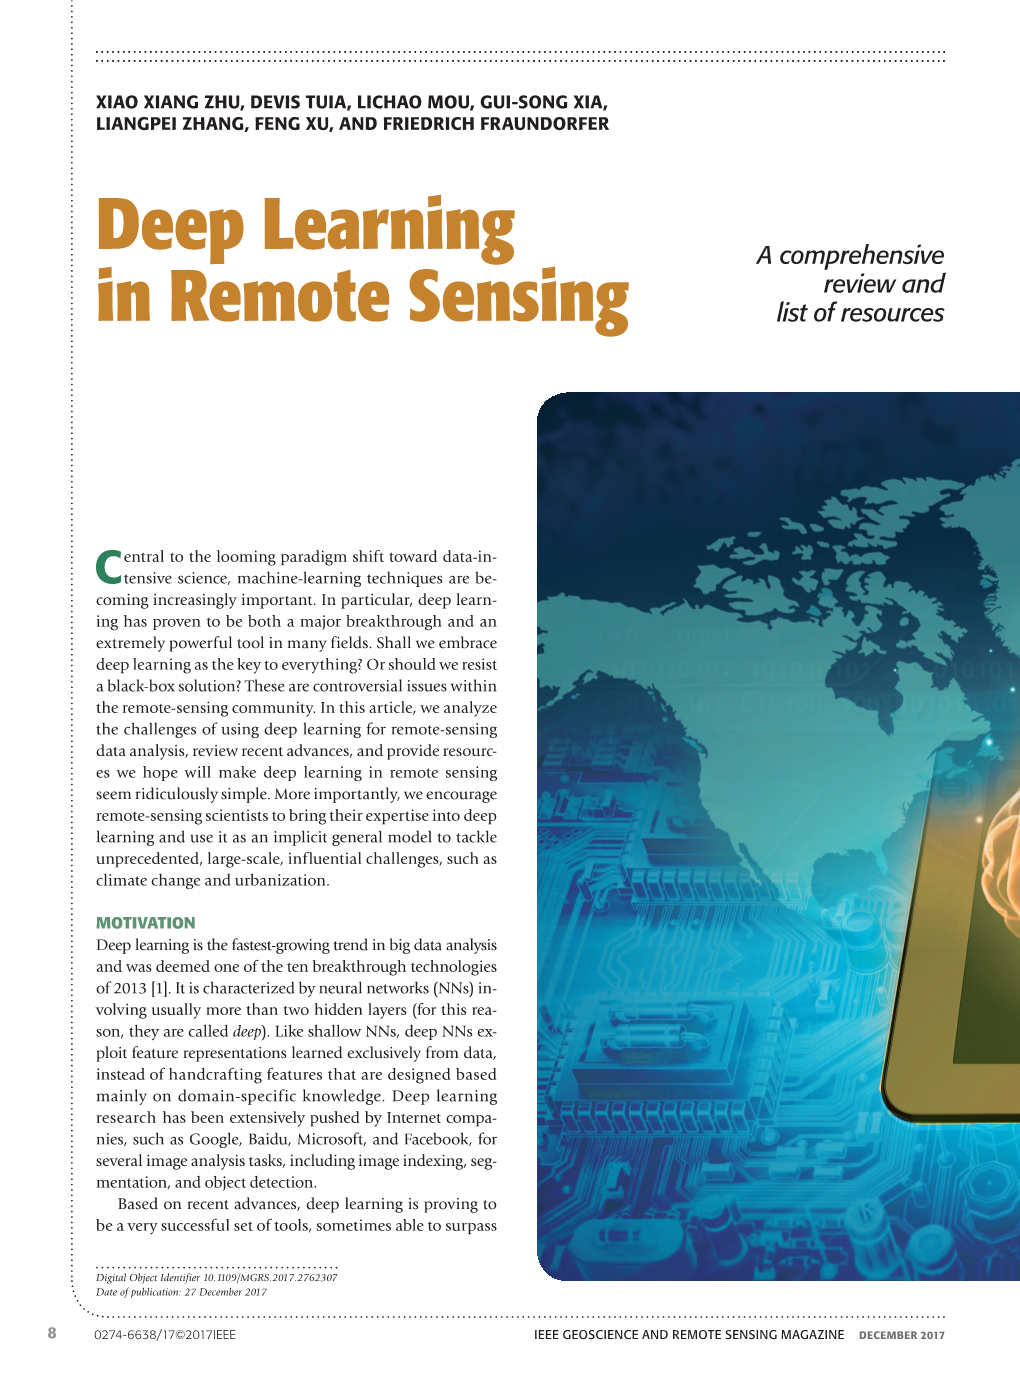 Deep Learning in Remote Sensing Seem Ridiculously Simple